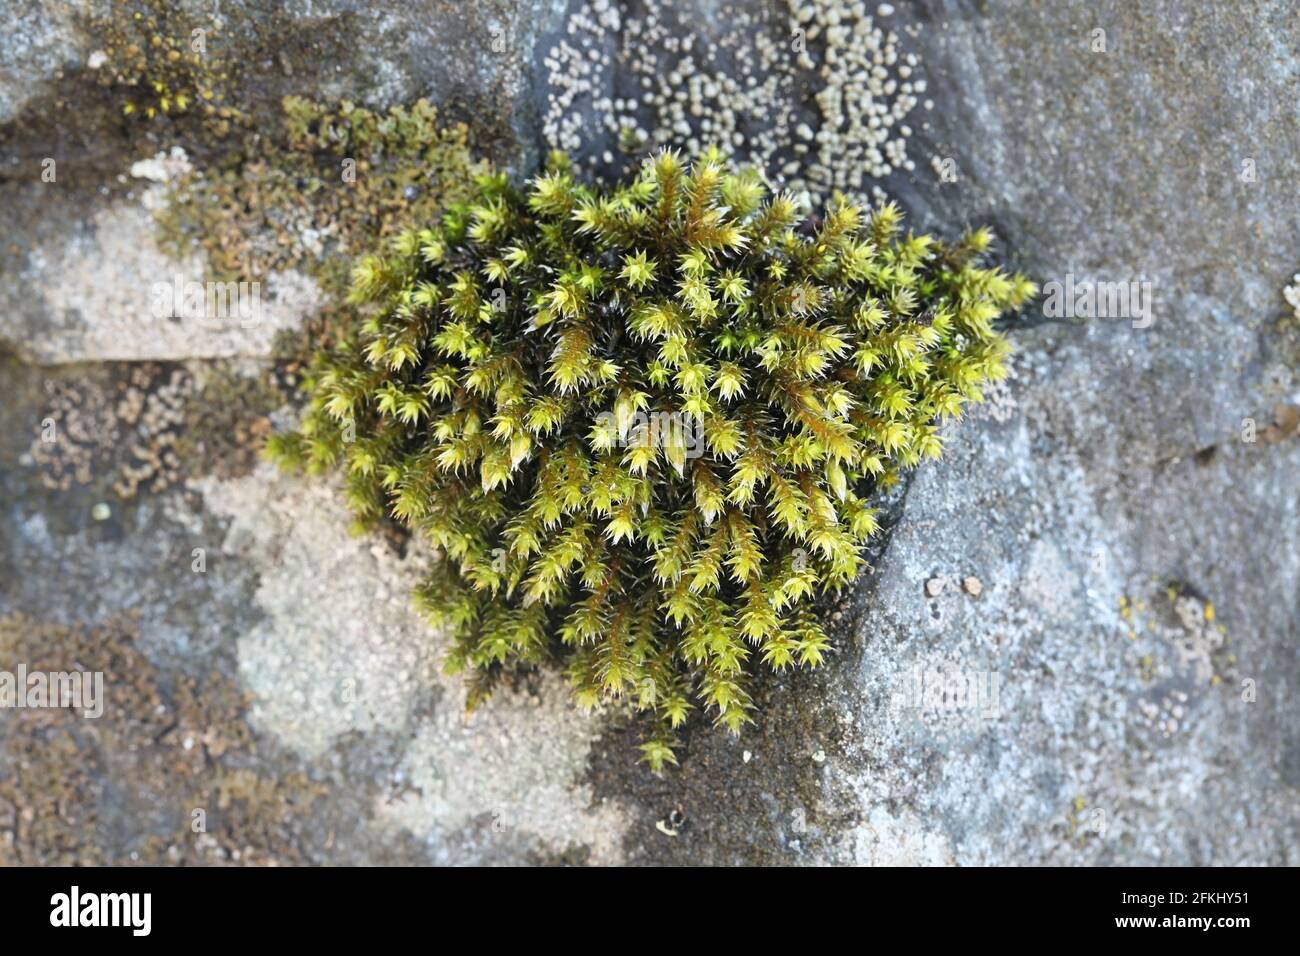 Hedwigia ciliata, commonly known as white-tipped moss Stock Photo